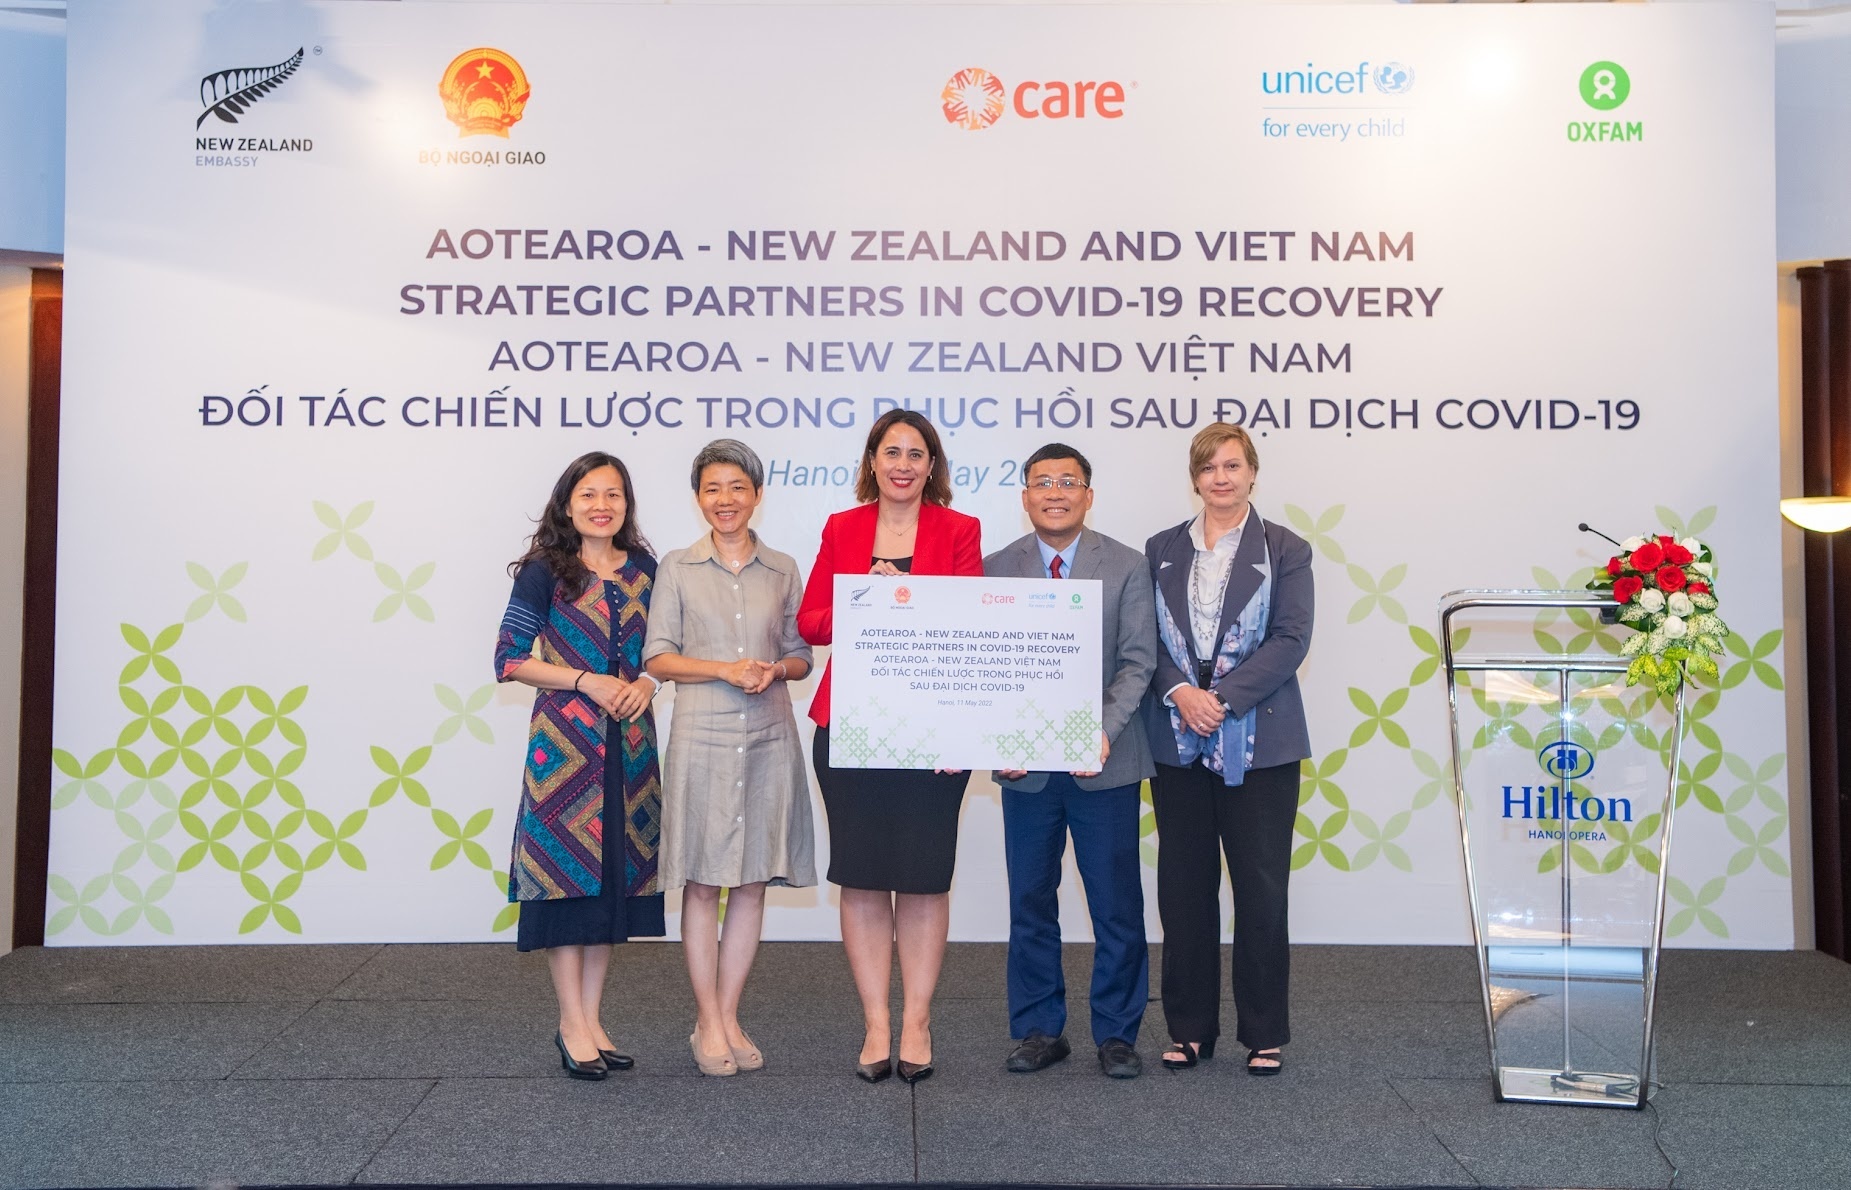 New Zealand supports the recovery of Vietnam with $1.3 million in assistance